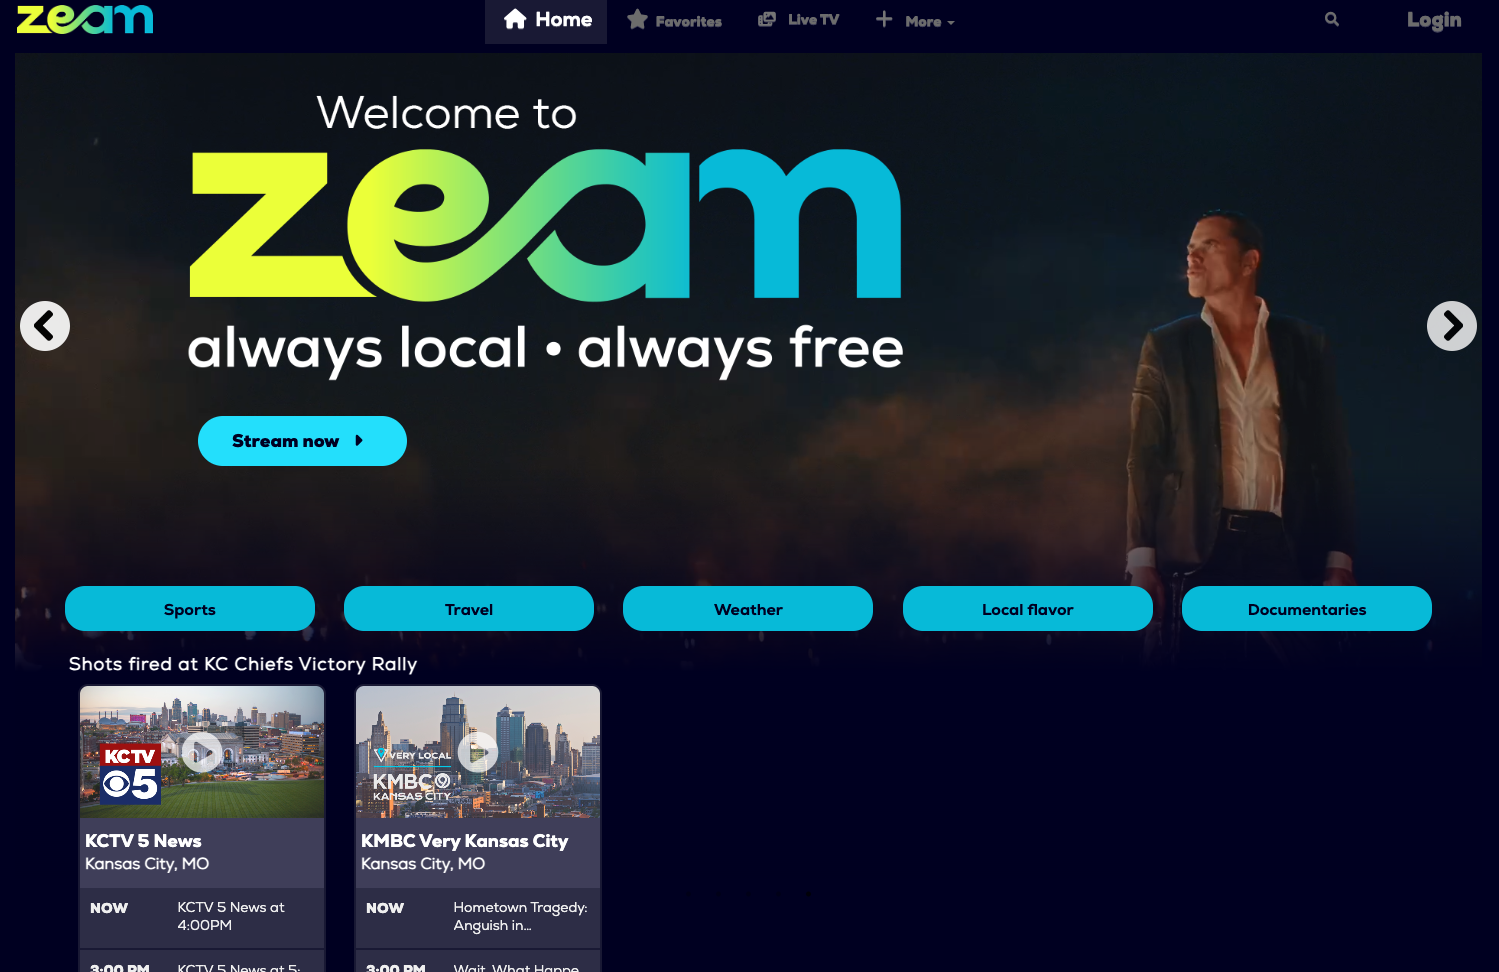 Zeam, a Free Streaming Service Featuring Local News, Travel and Sports Content, is Now Live